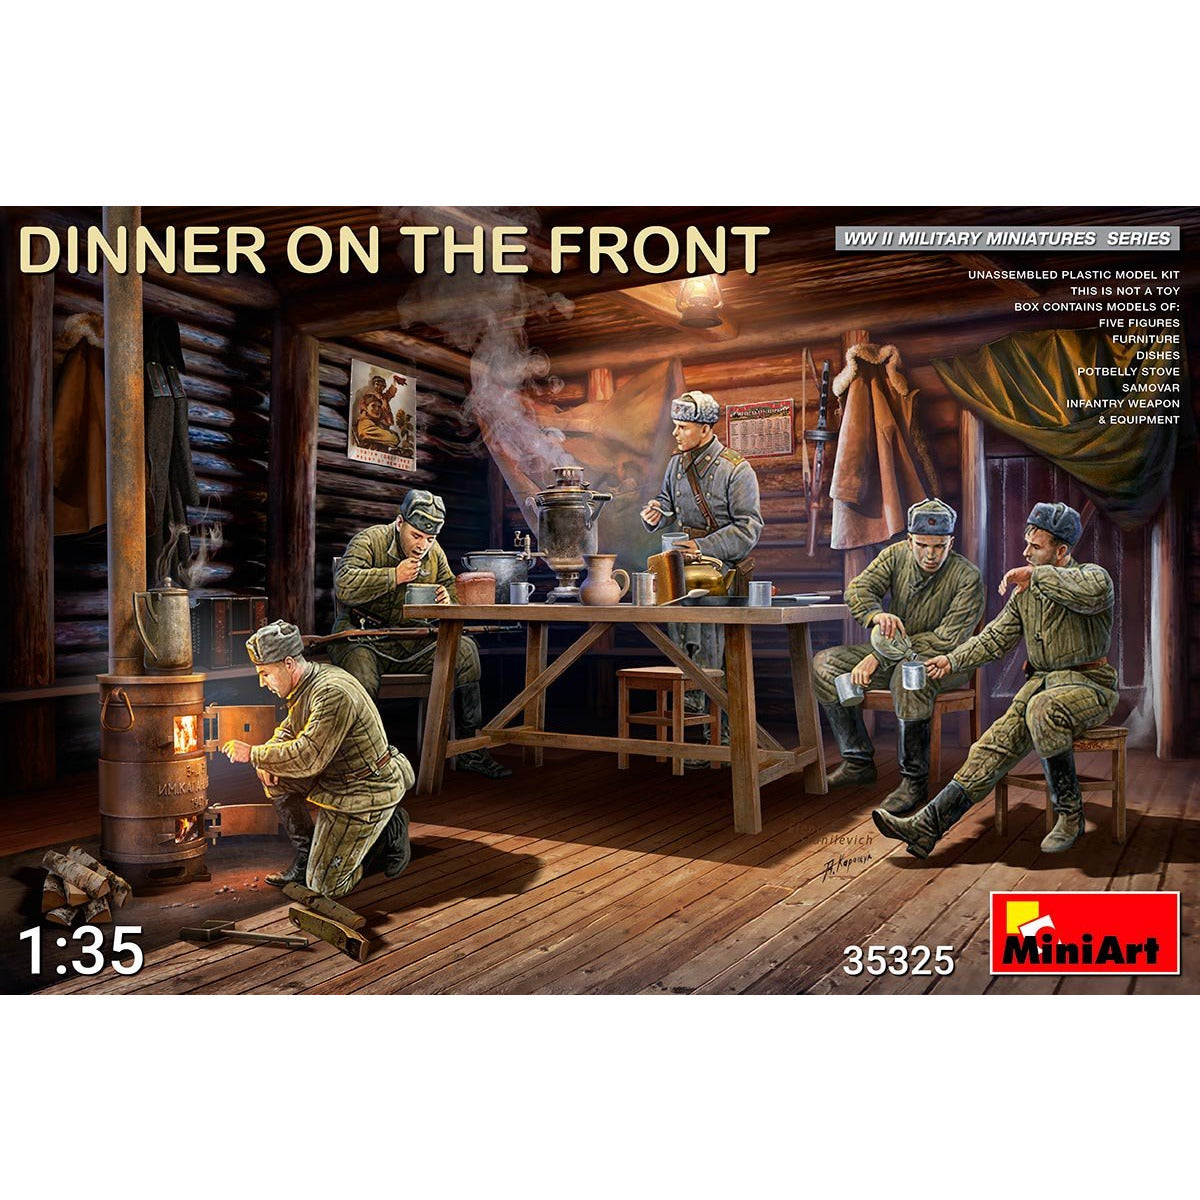 Dinner on the Front #35325 1/35 Scenery Kit by MiniArt